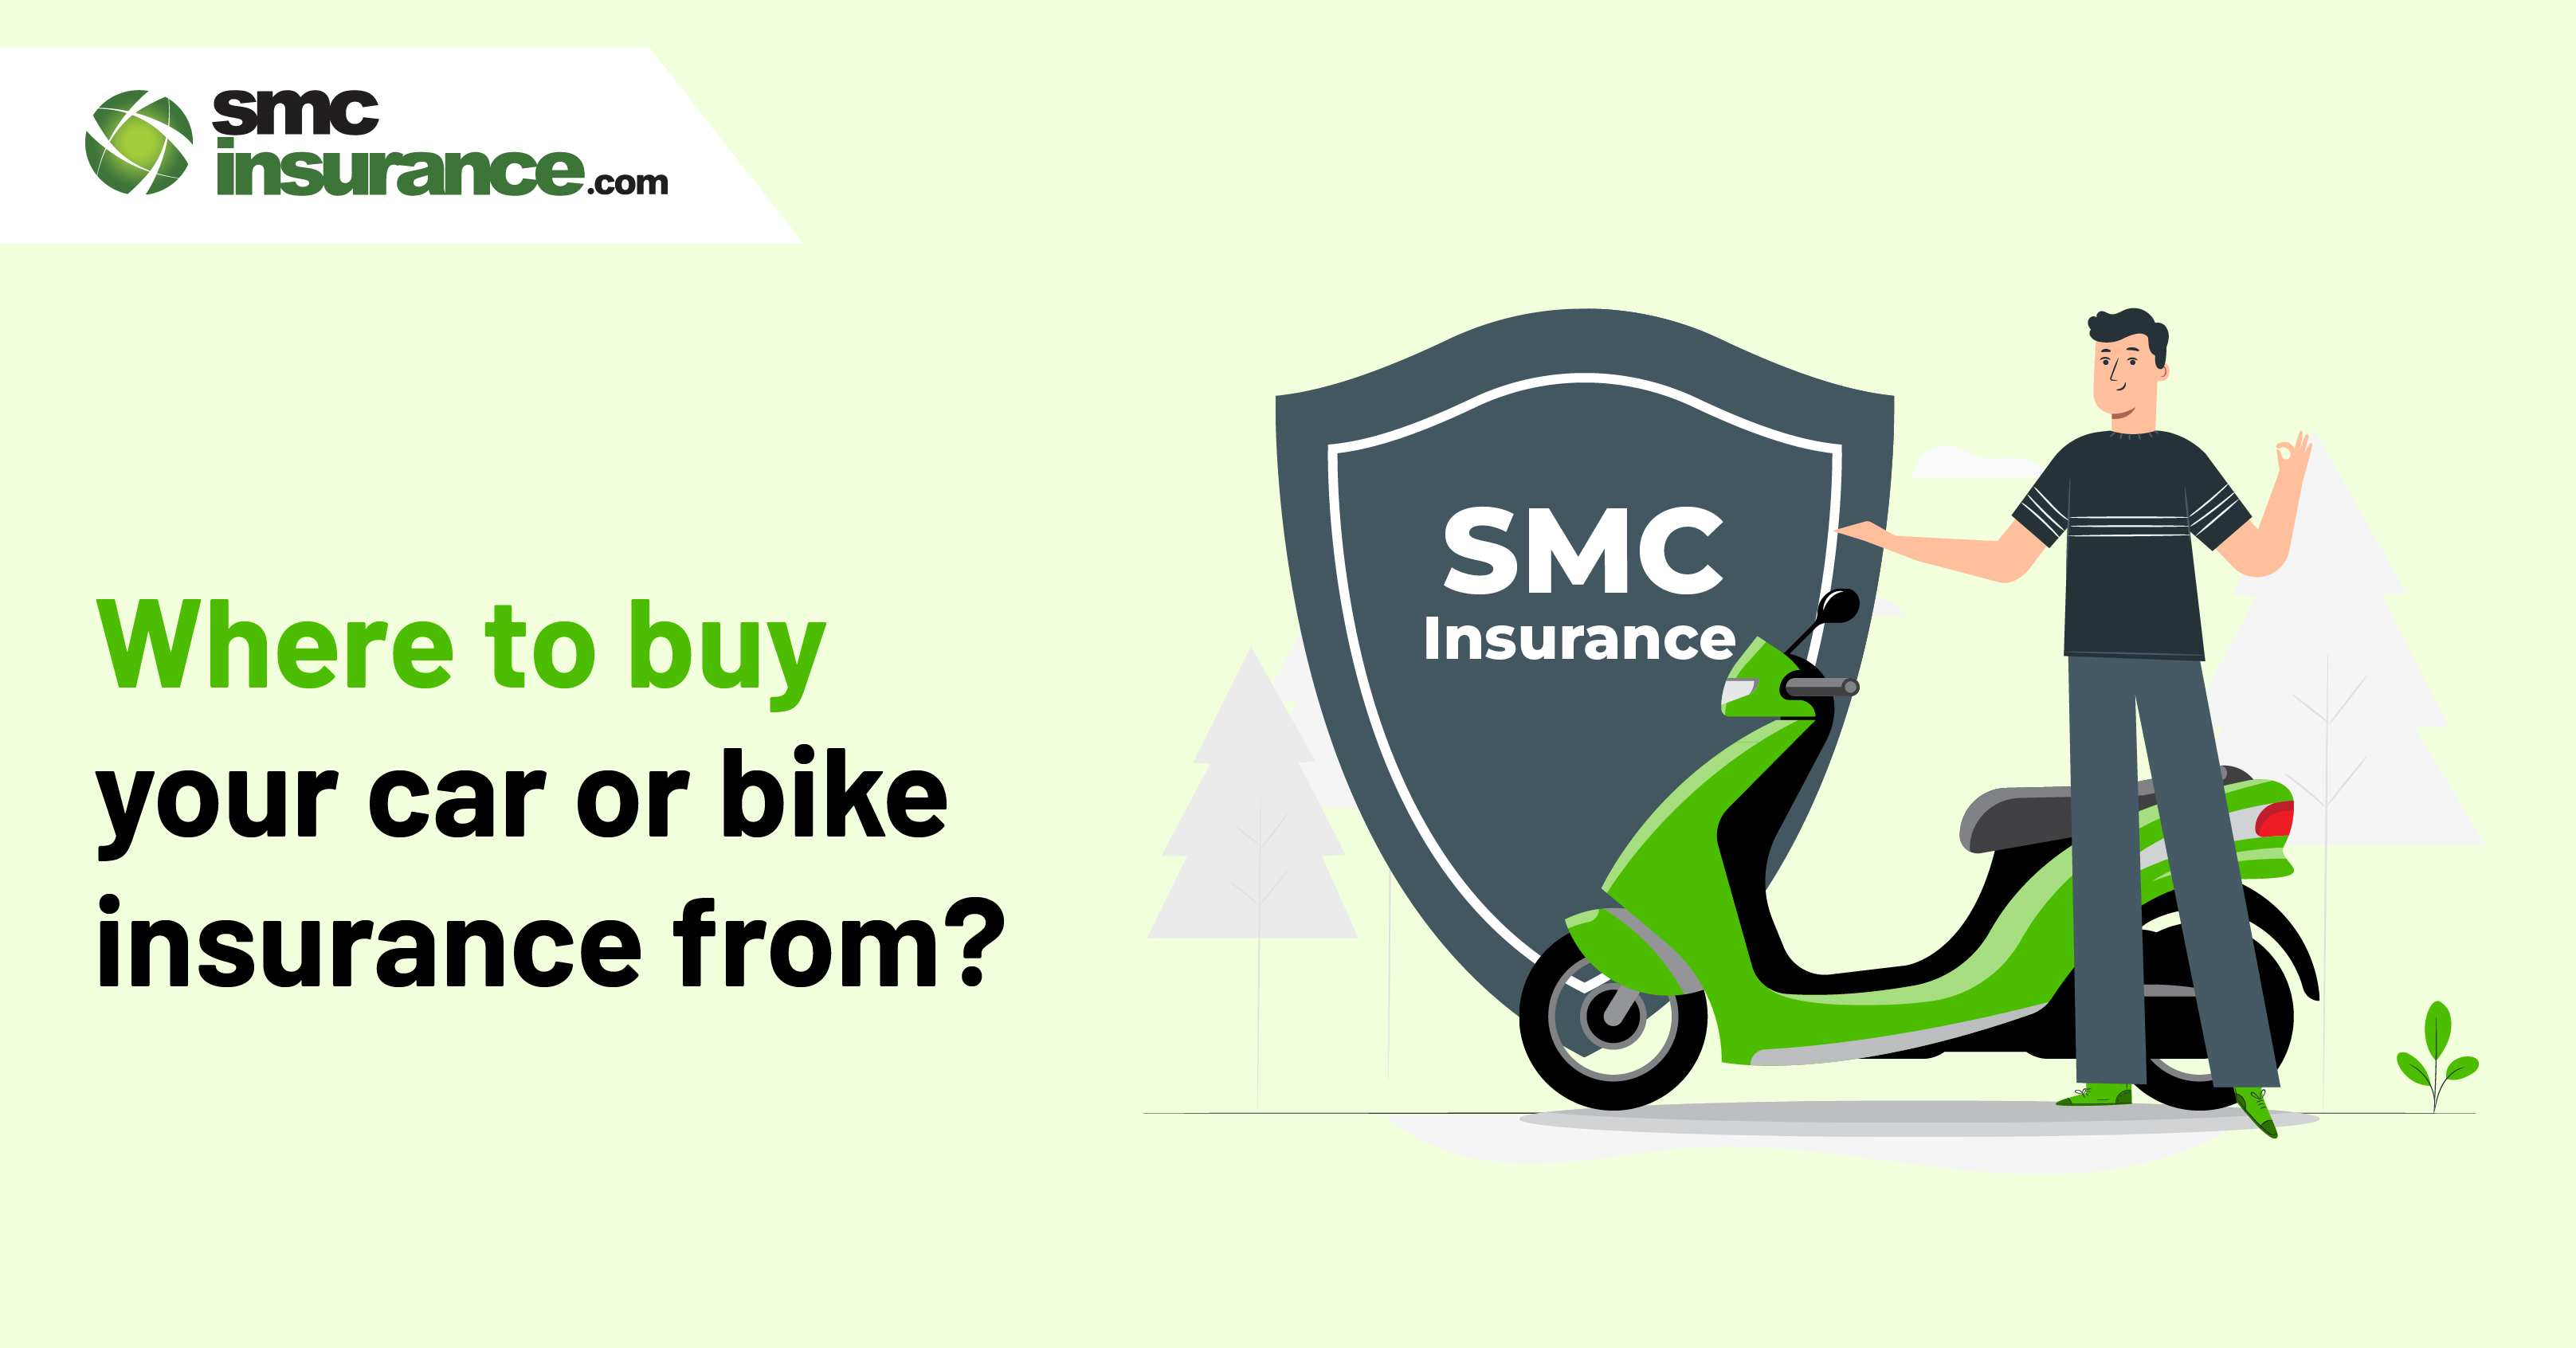 Where To Buy Your Car Or Bike Insurance From?